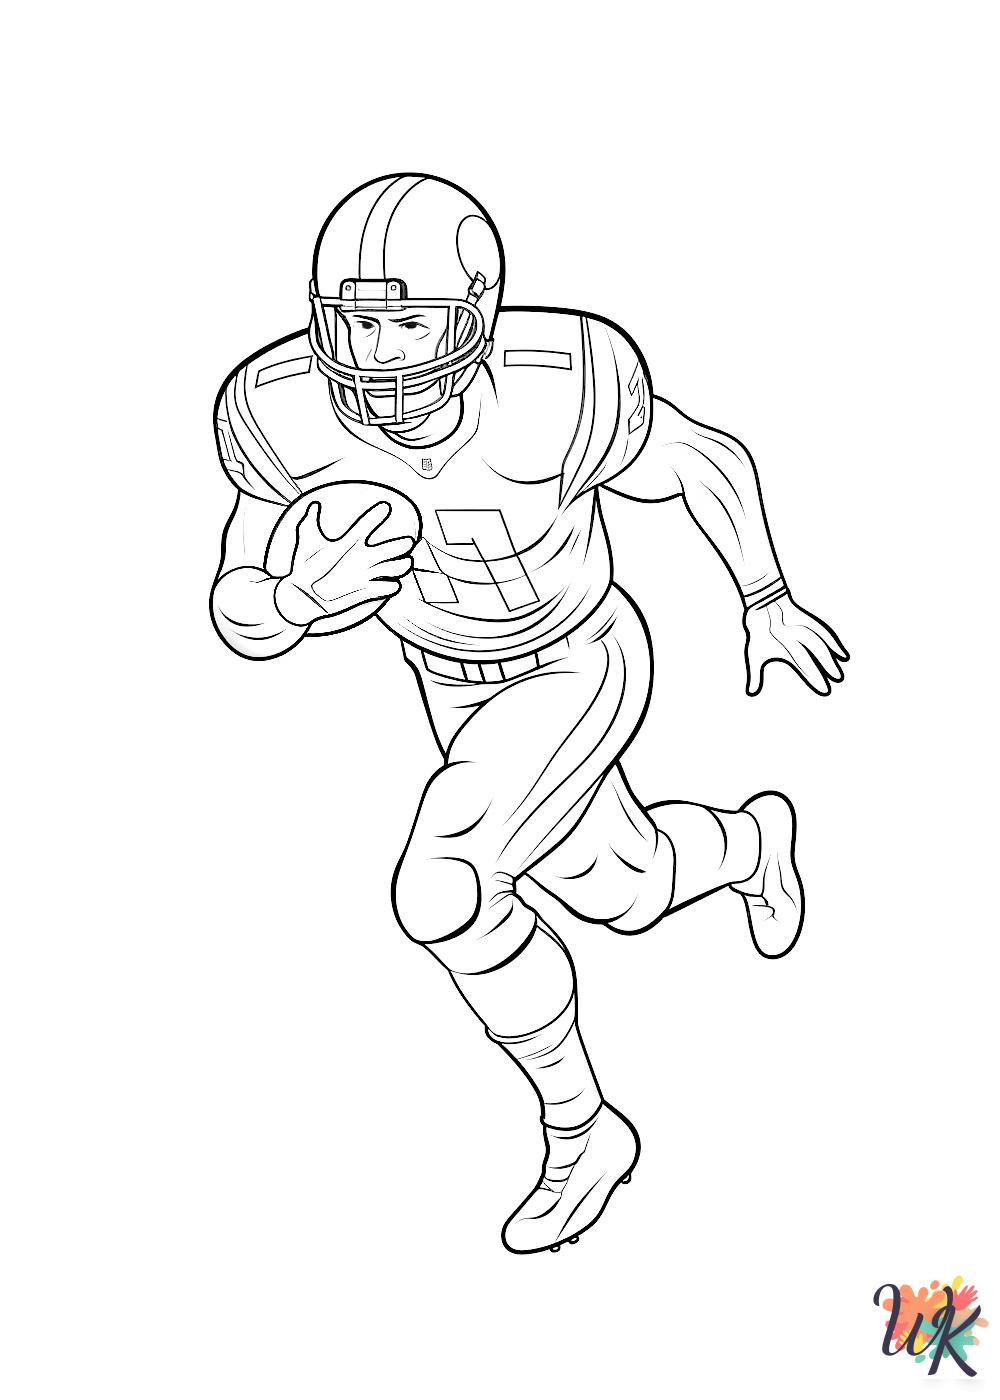 NFL Coloring Pages 12